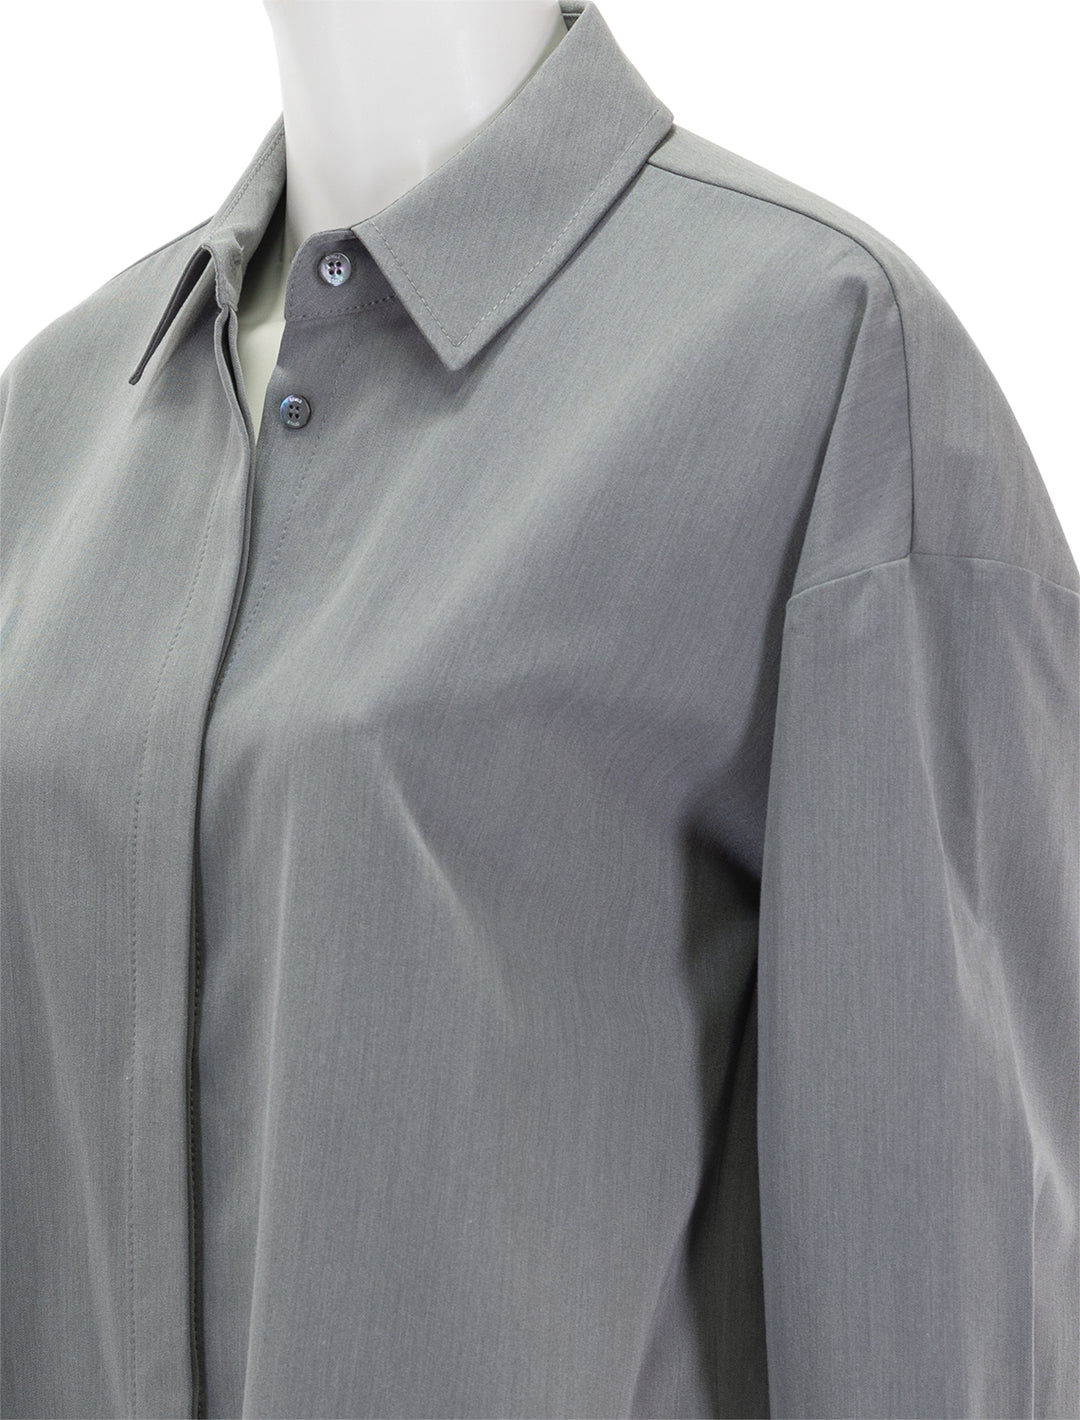 Close-up view of STAUD's colton shirt in heather grey.